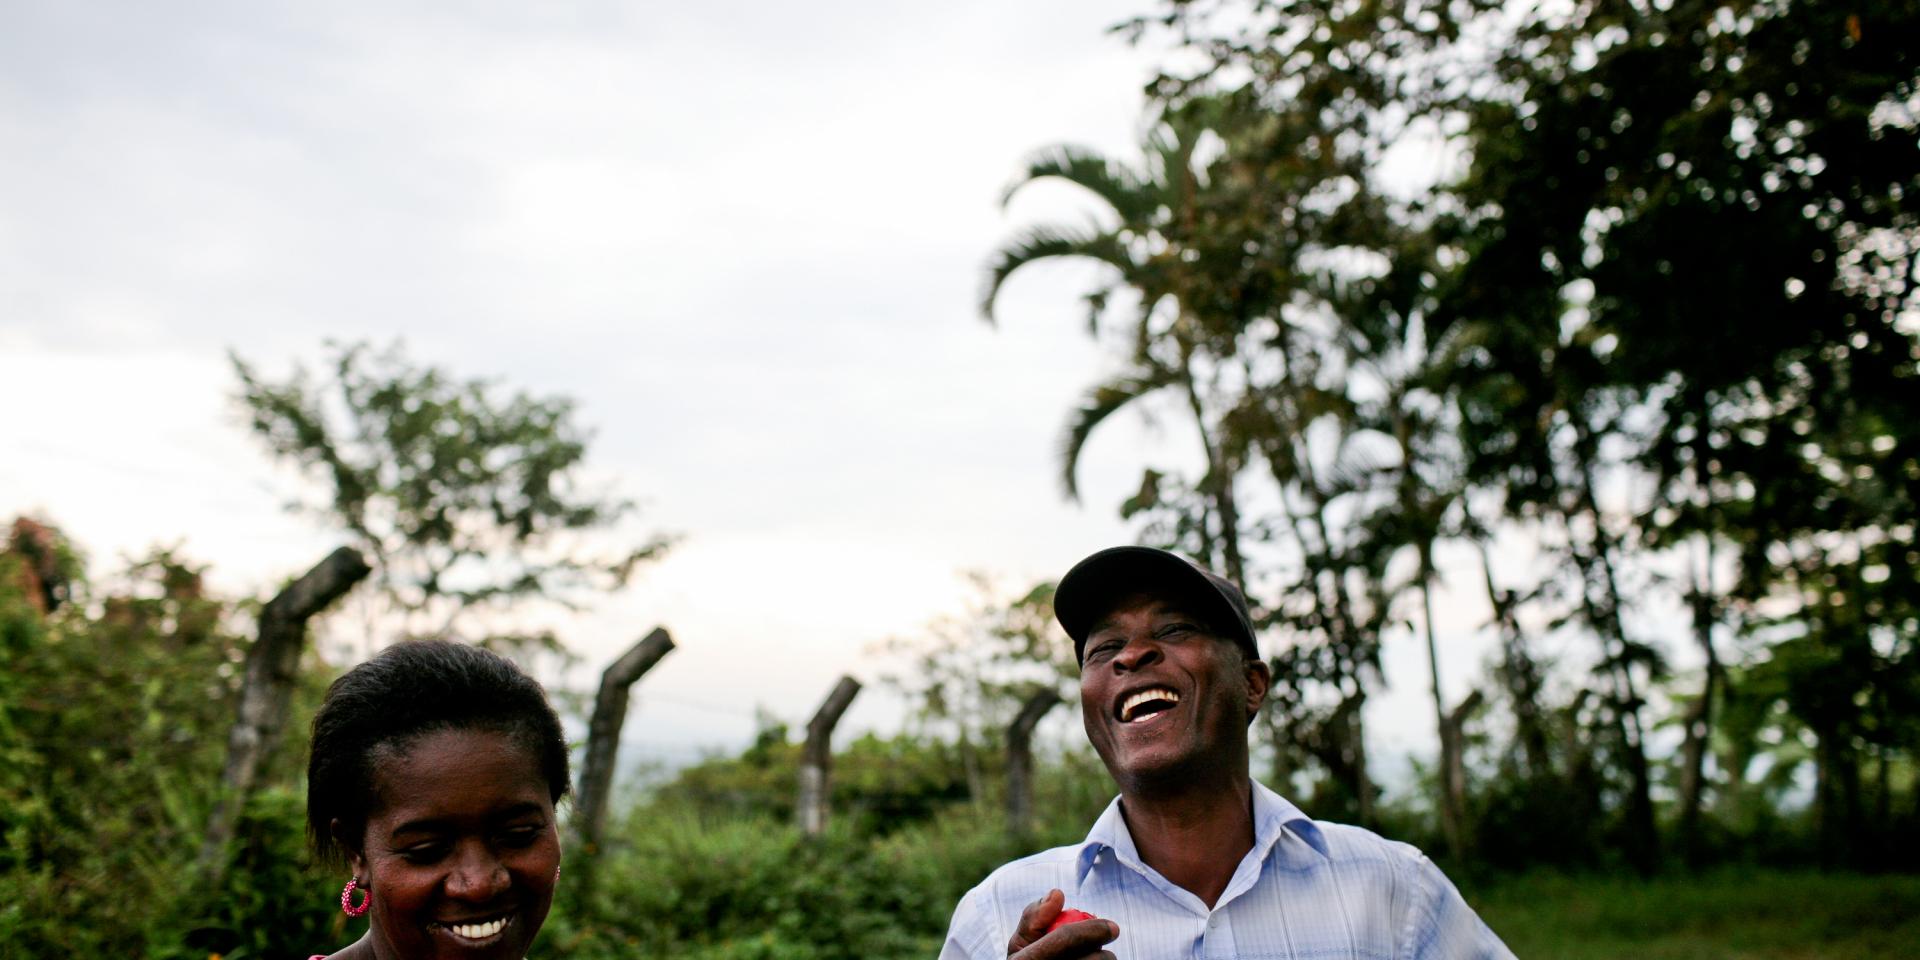 A woman and man laugh together outside next to crops and trees